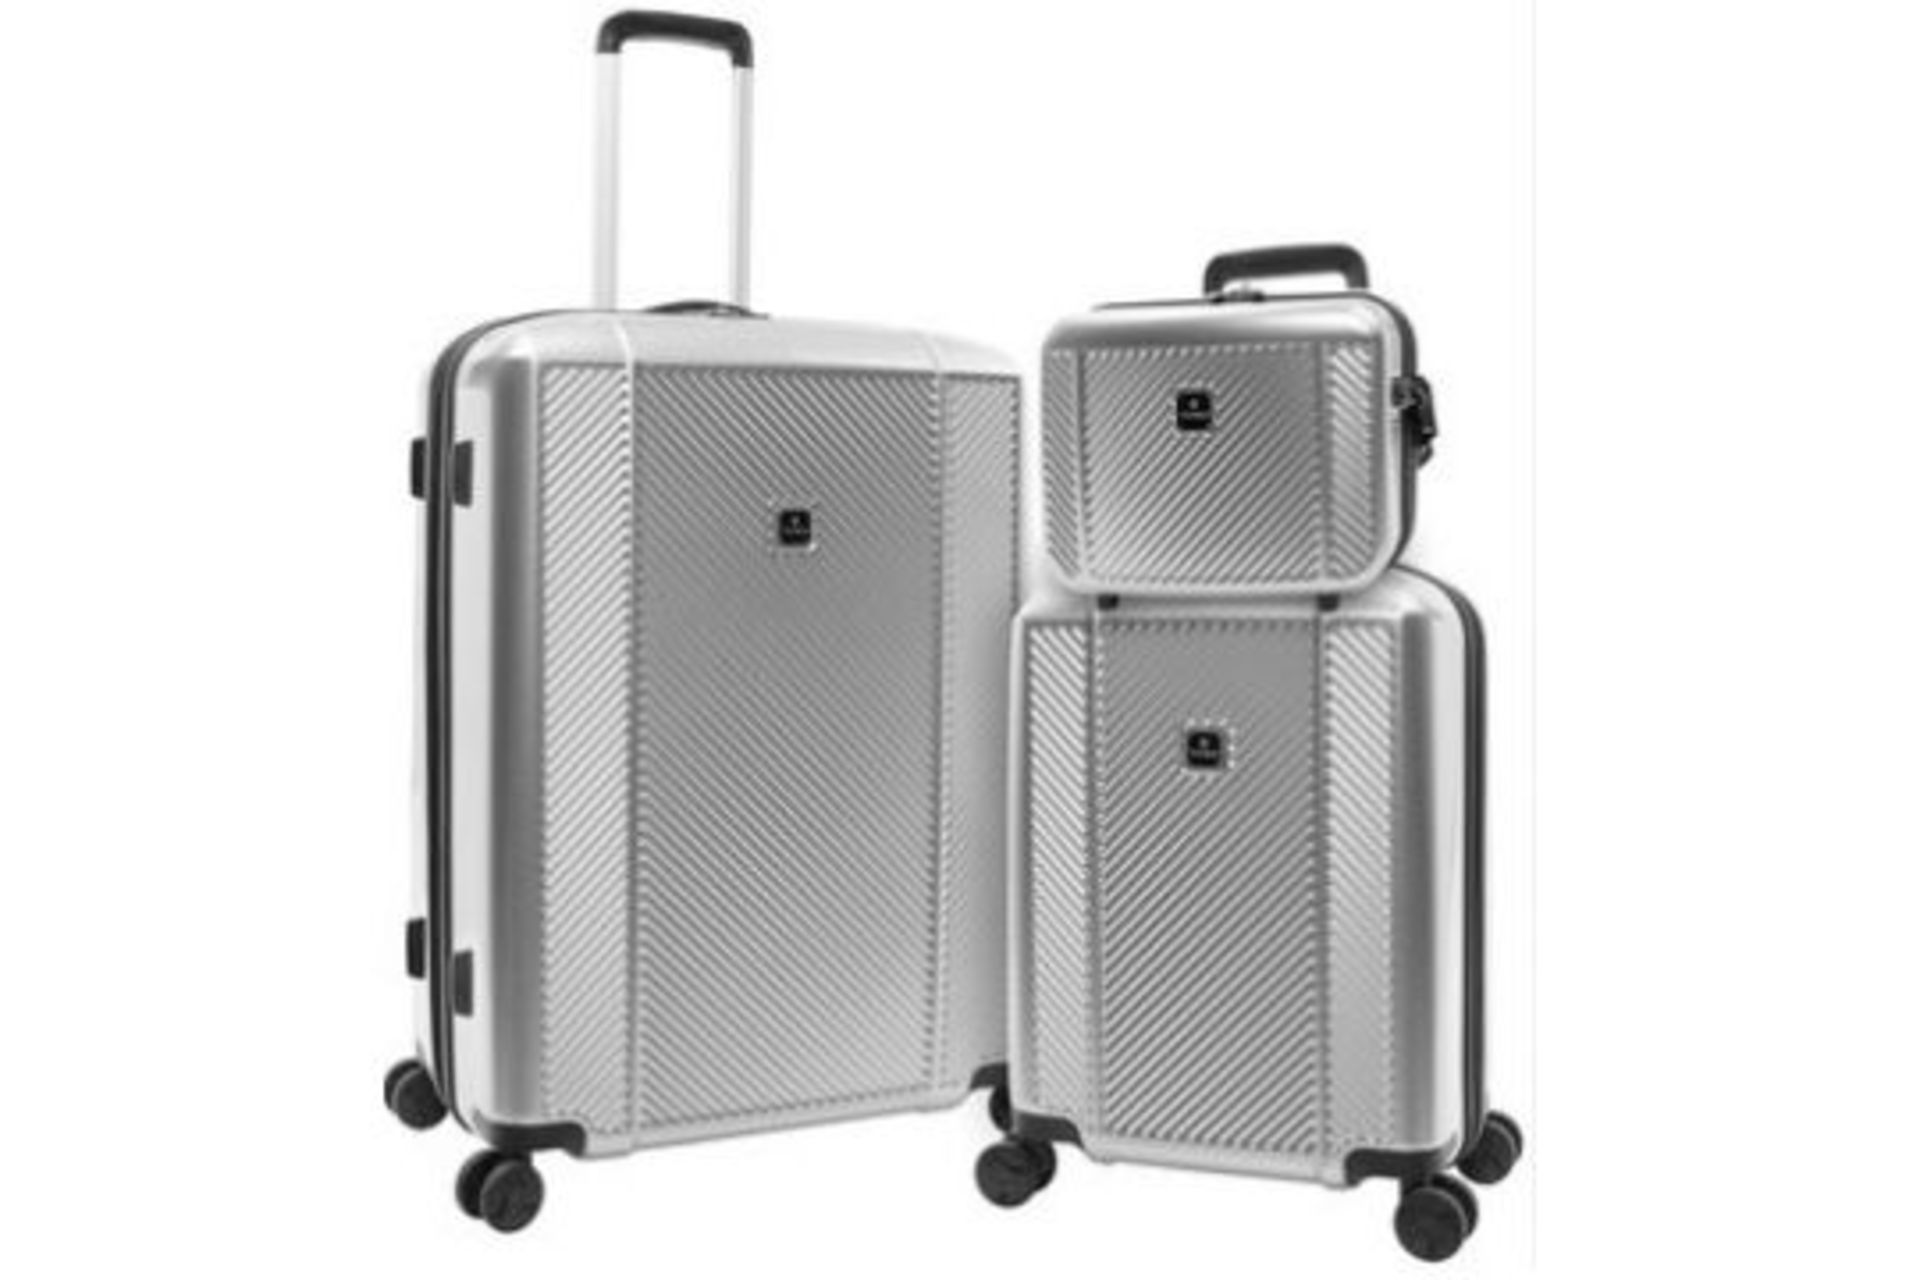 3 x New Boxed 3 Piece Sets of TAG Spectrum Hardside Luggage Set. (SILVER). RRP £199.99 per set.